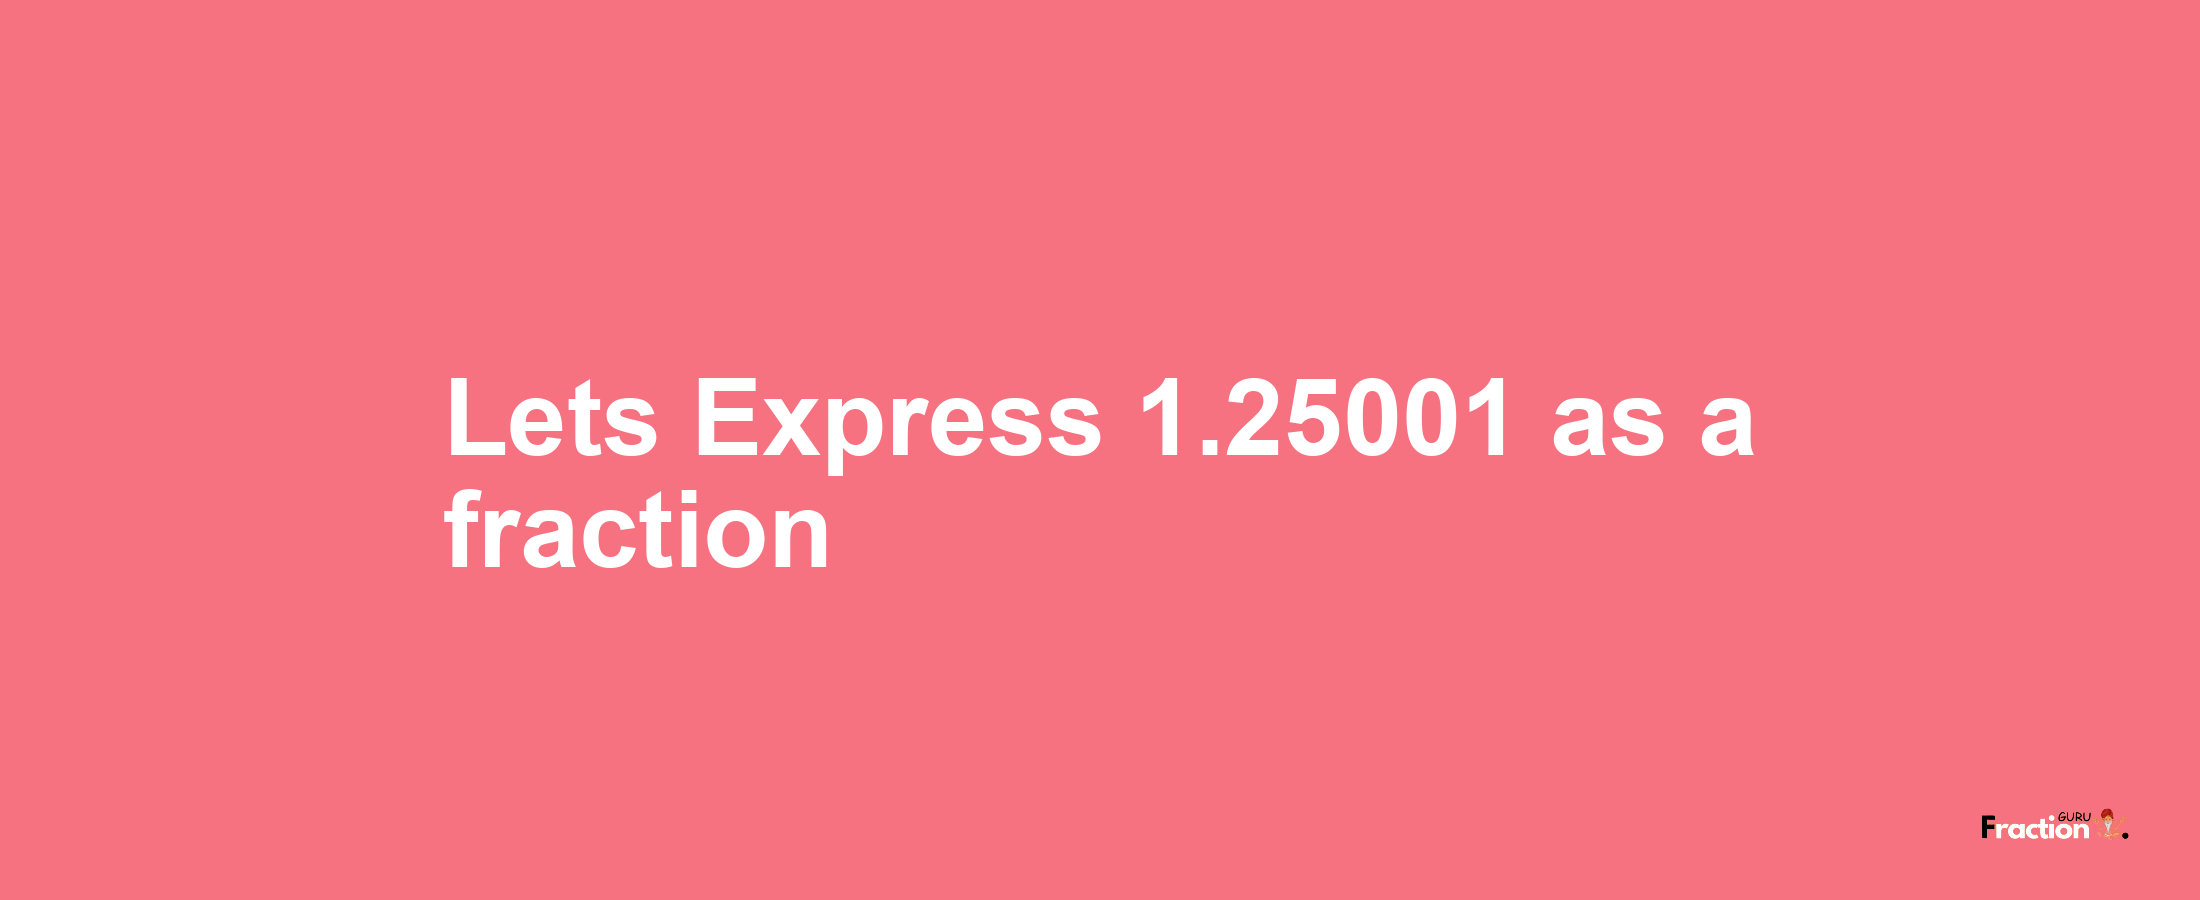 Lets Express 1.25001 as afraction